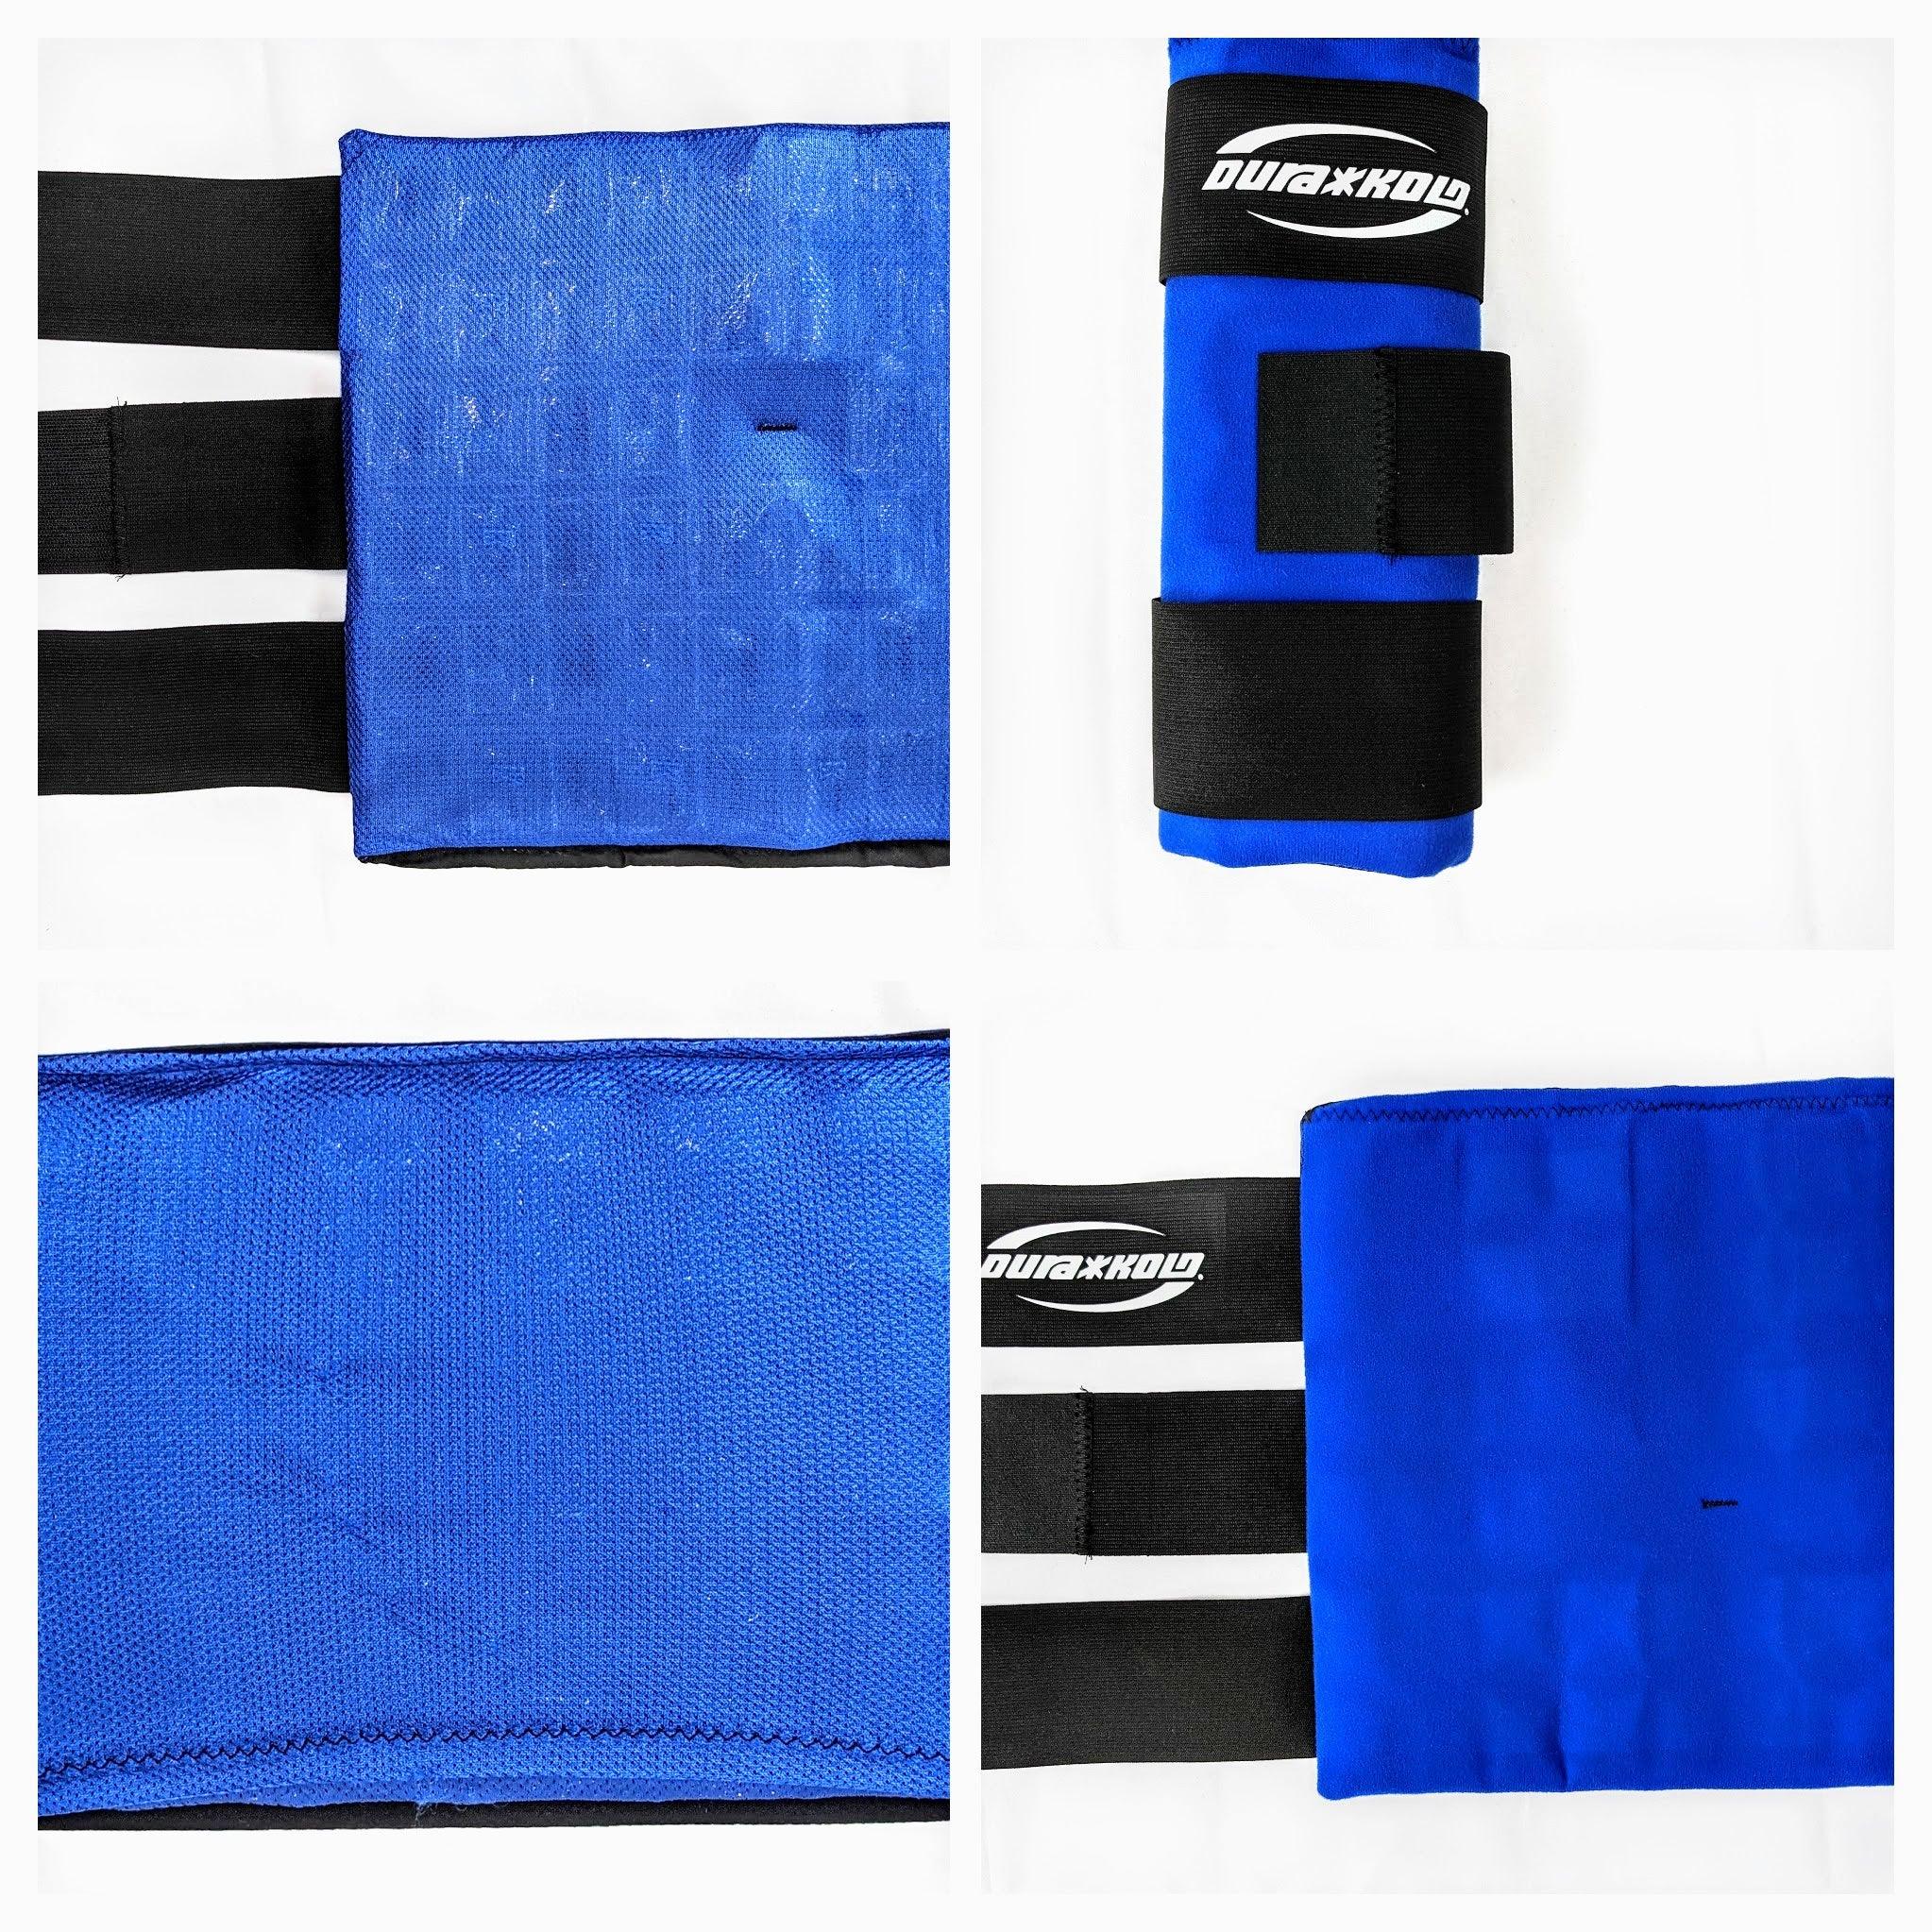 $16 Special - 15-Inch Universal Cold Therapy Velcro Straps (2 Pack) – My  Cold Therapy